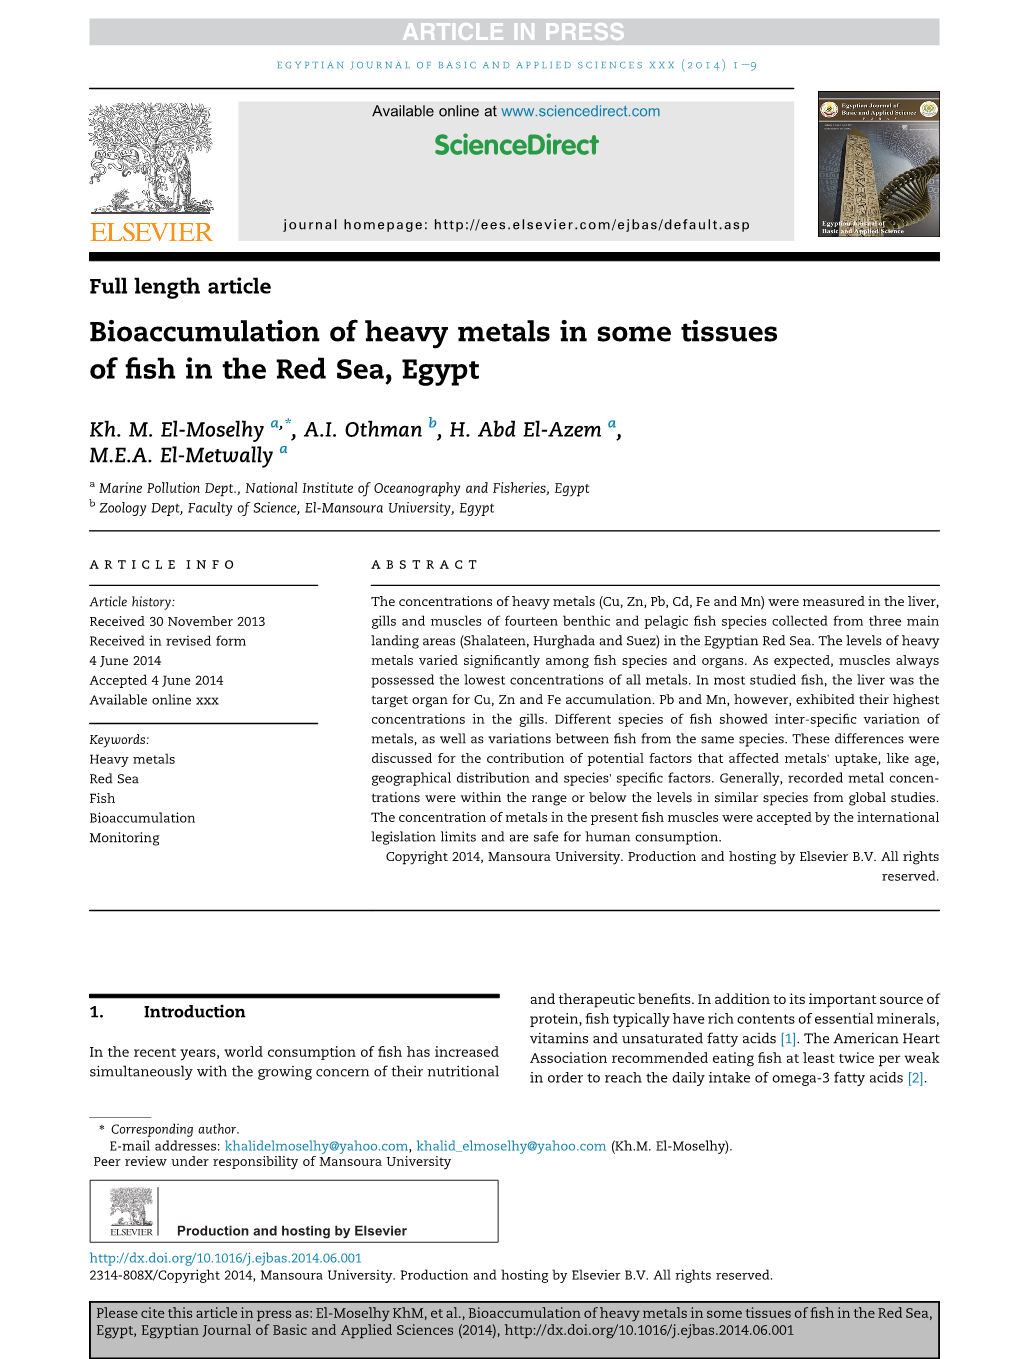 Bioaccumulation of Heavy Metals in Some Tissues of Fish in the Red Sea